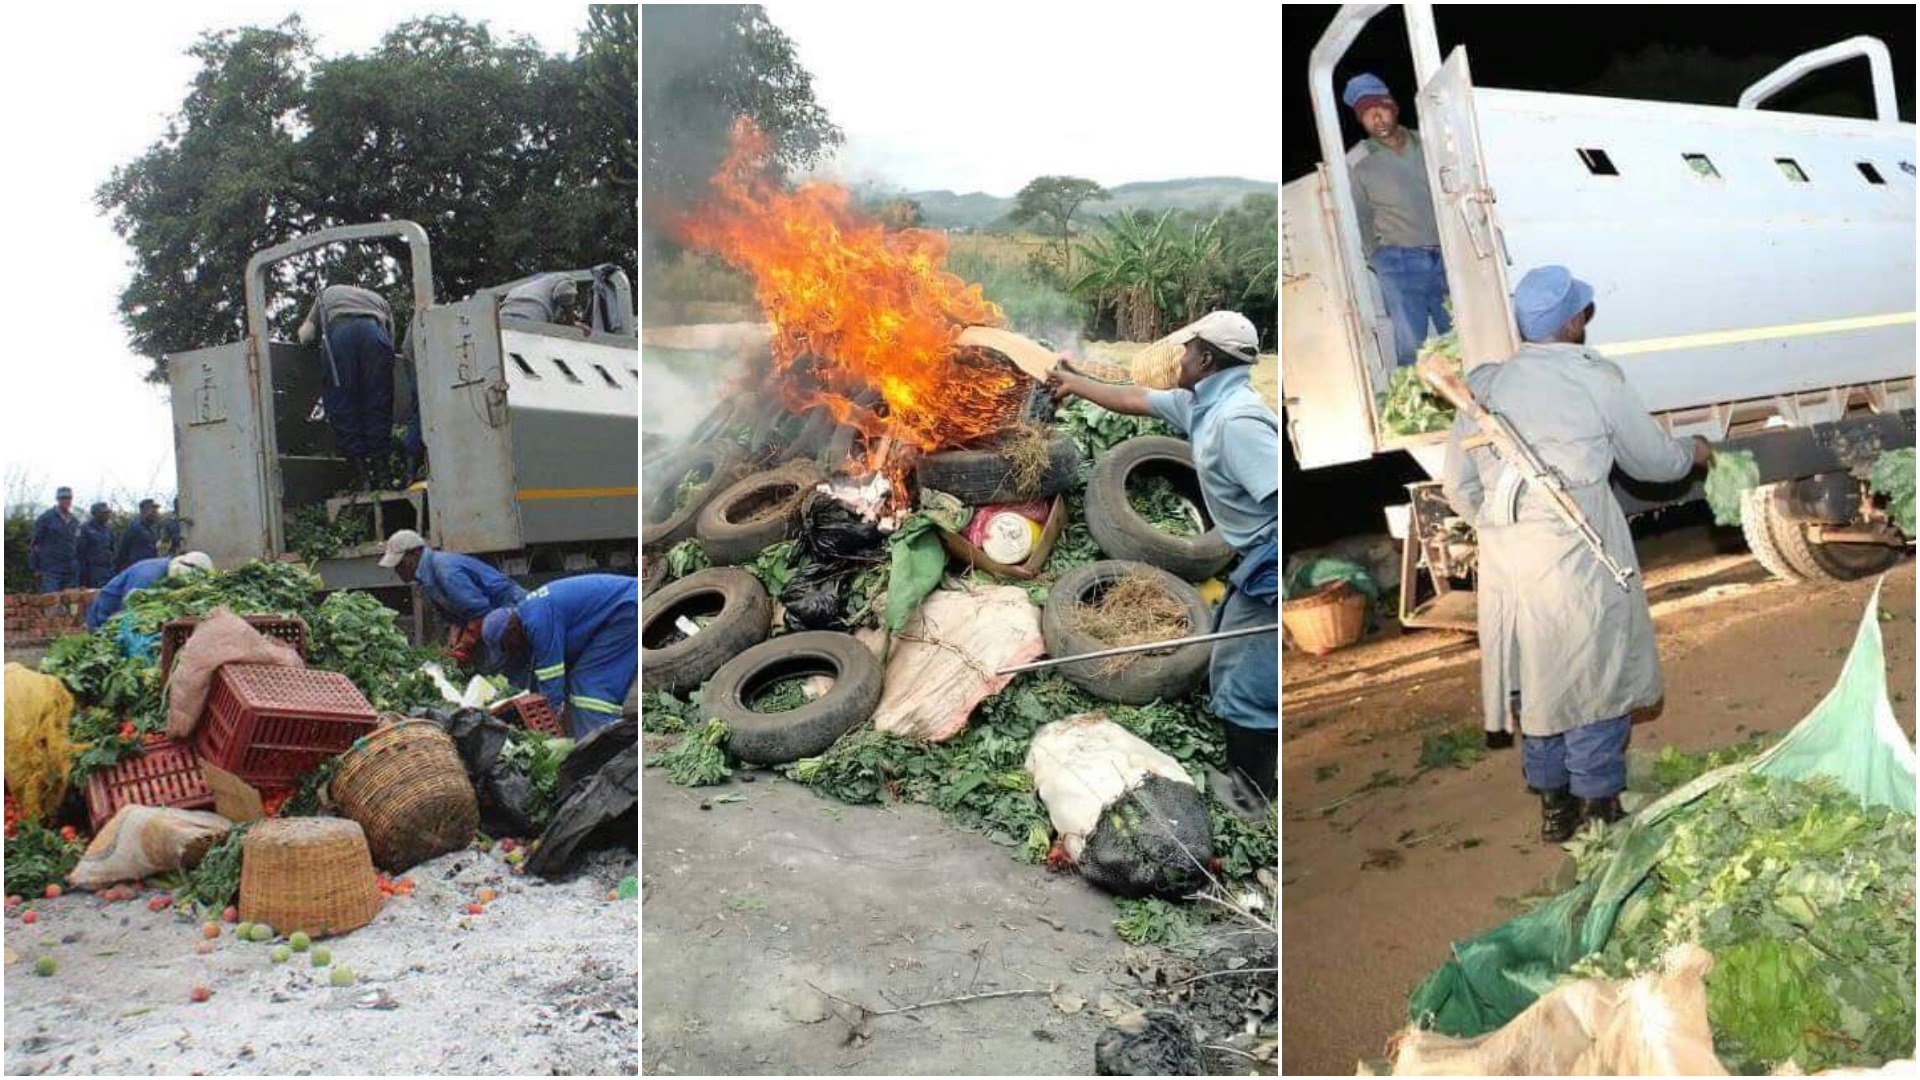 Police Confiscate and Burn Vegetables